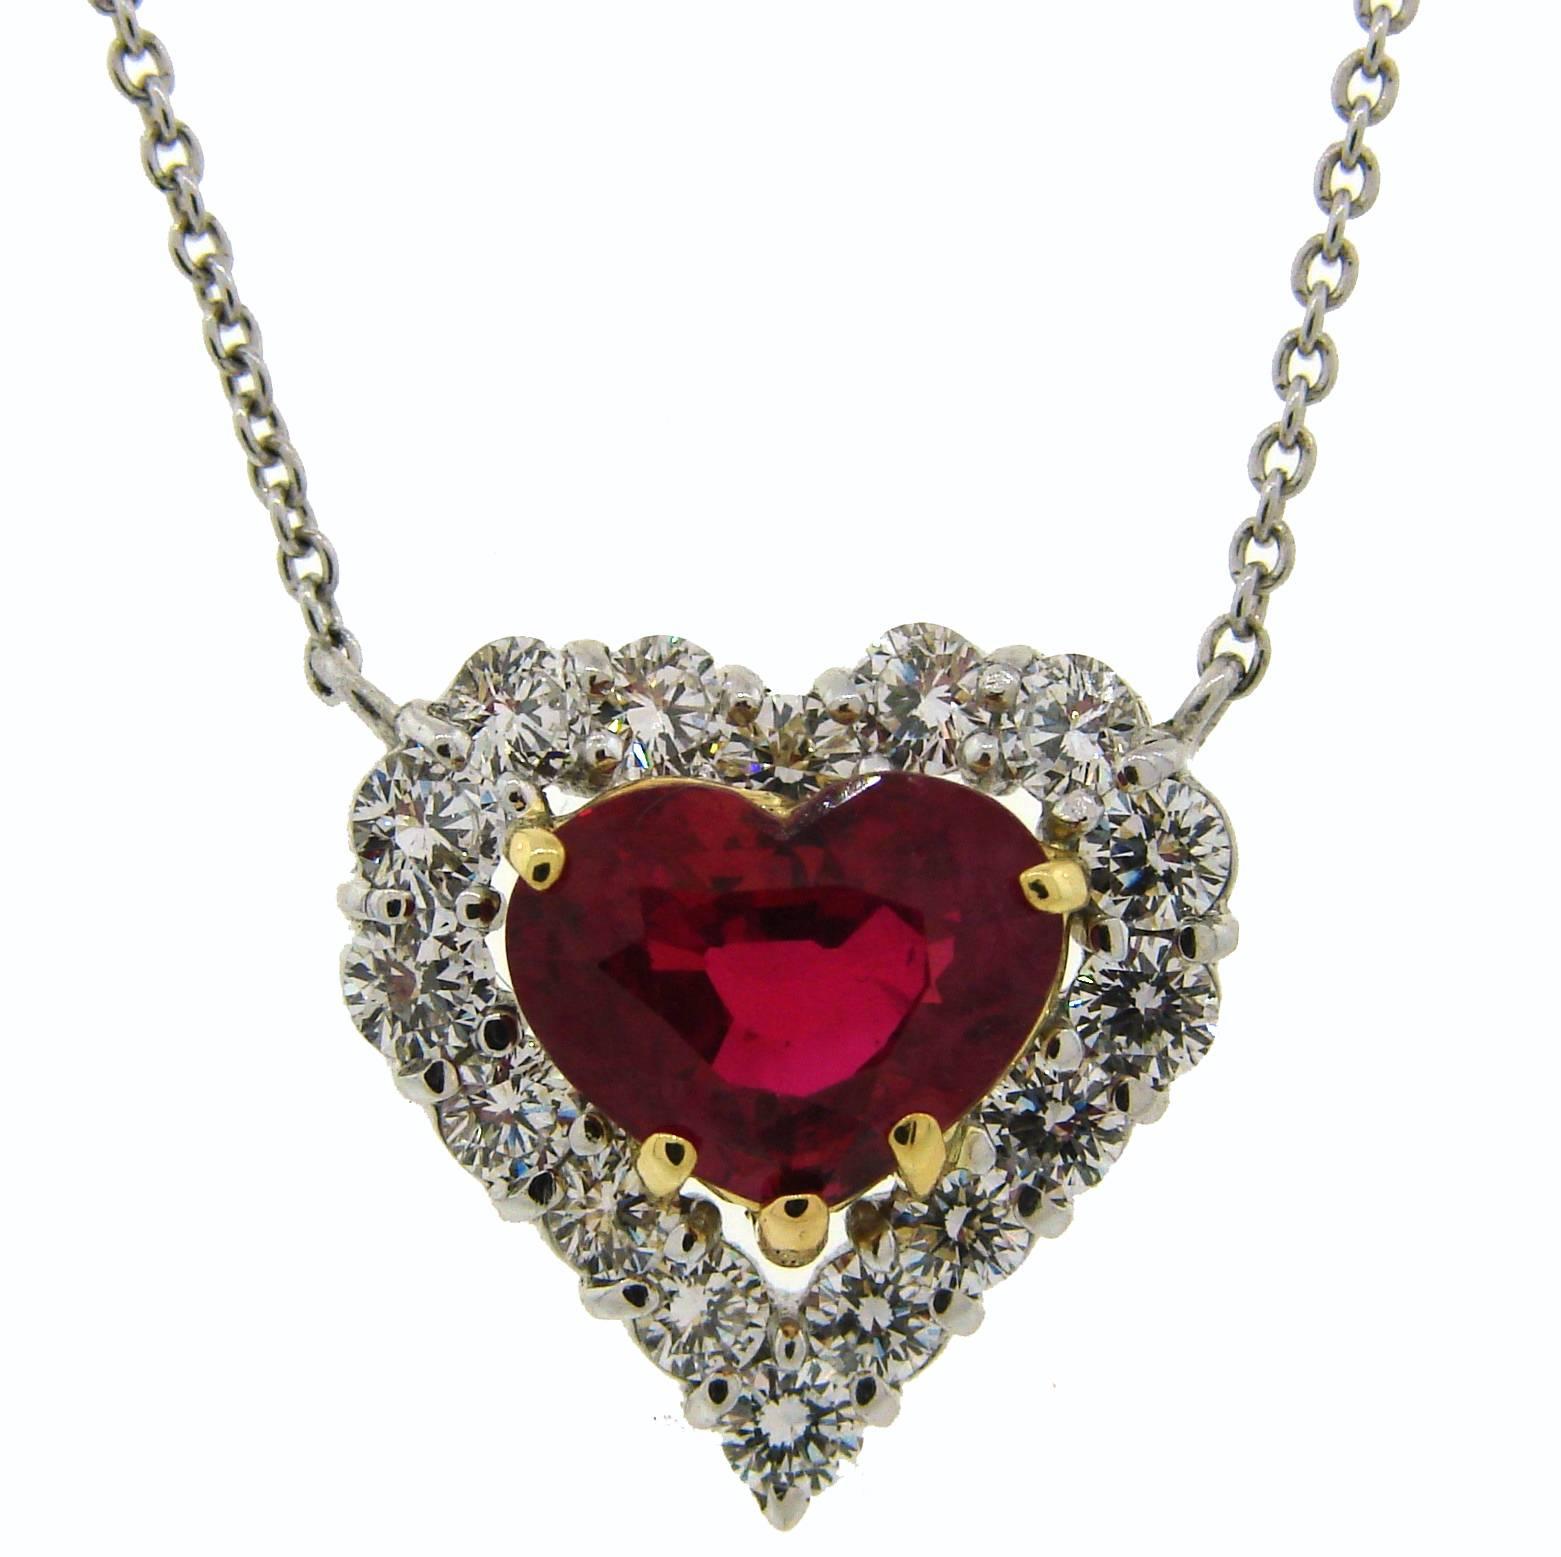 Classy elegant Heart pendant necklace created by Laurence Graff. This romantic necklace with the finest quality ruby and diamonds is a perfect gift to show someone you love dear and important they are. By giving this finest quality ruby and diamond